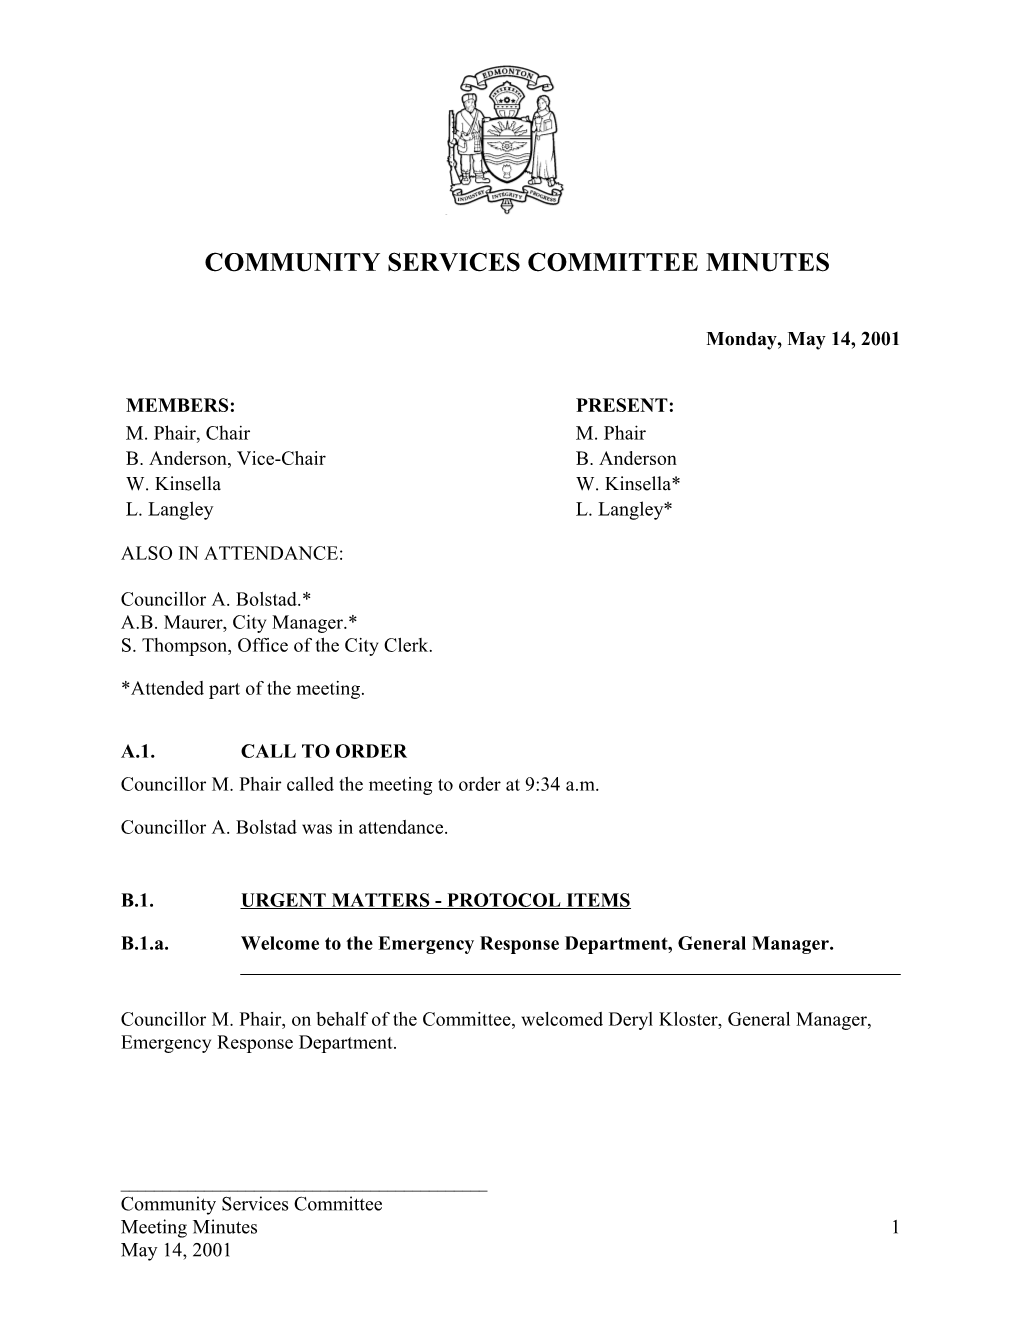 Minutes for Community Services Committee May 14, 2001 Meeting